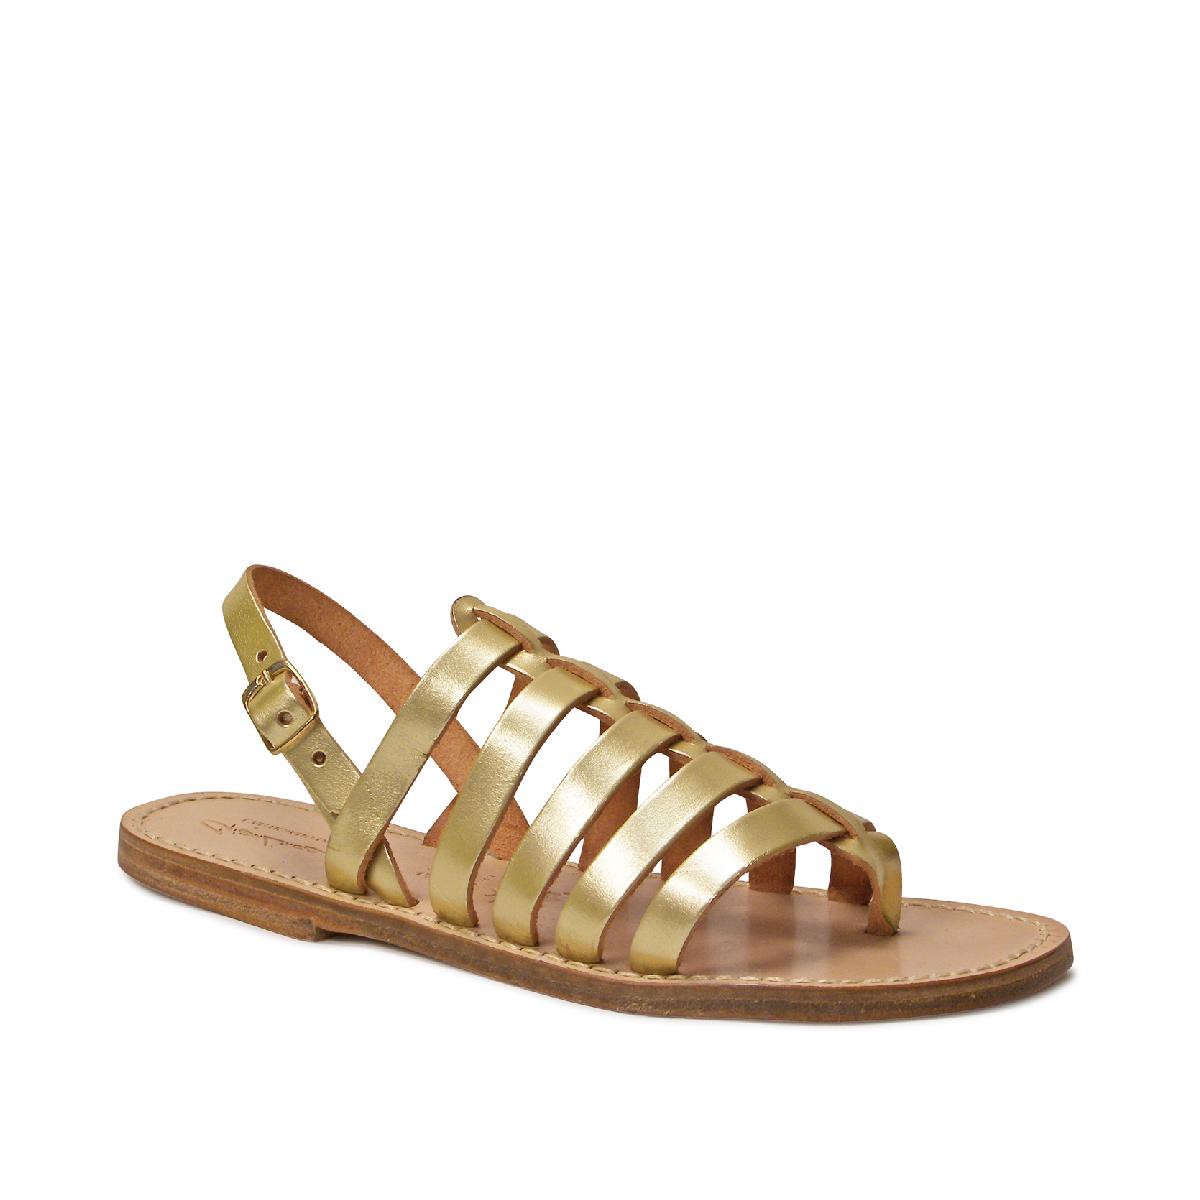 tan and gold flat sandals